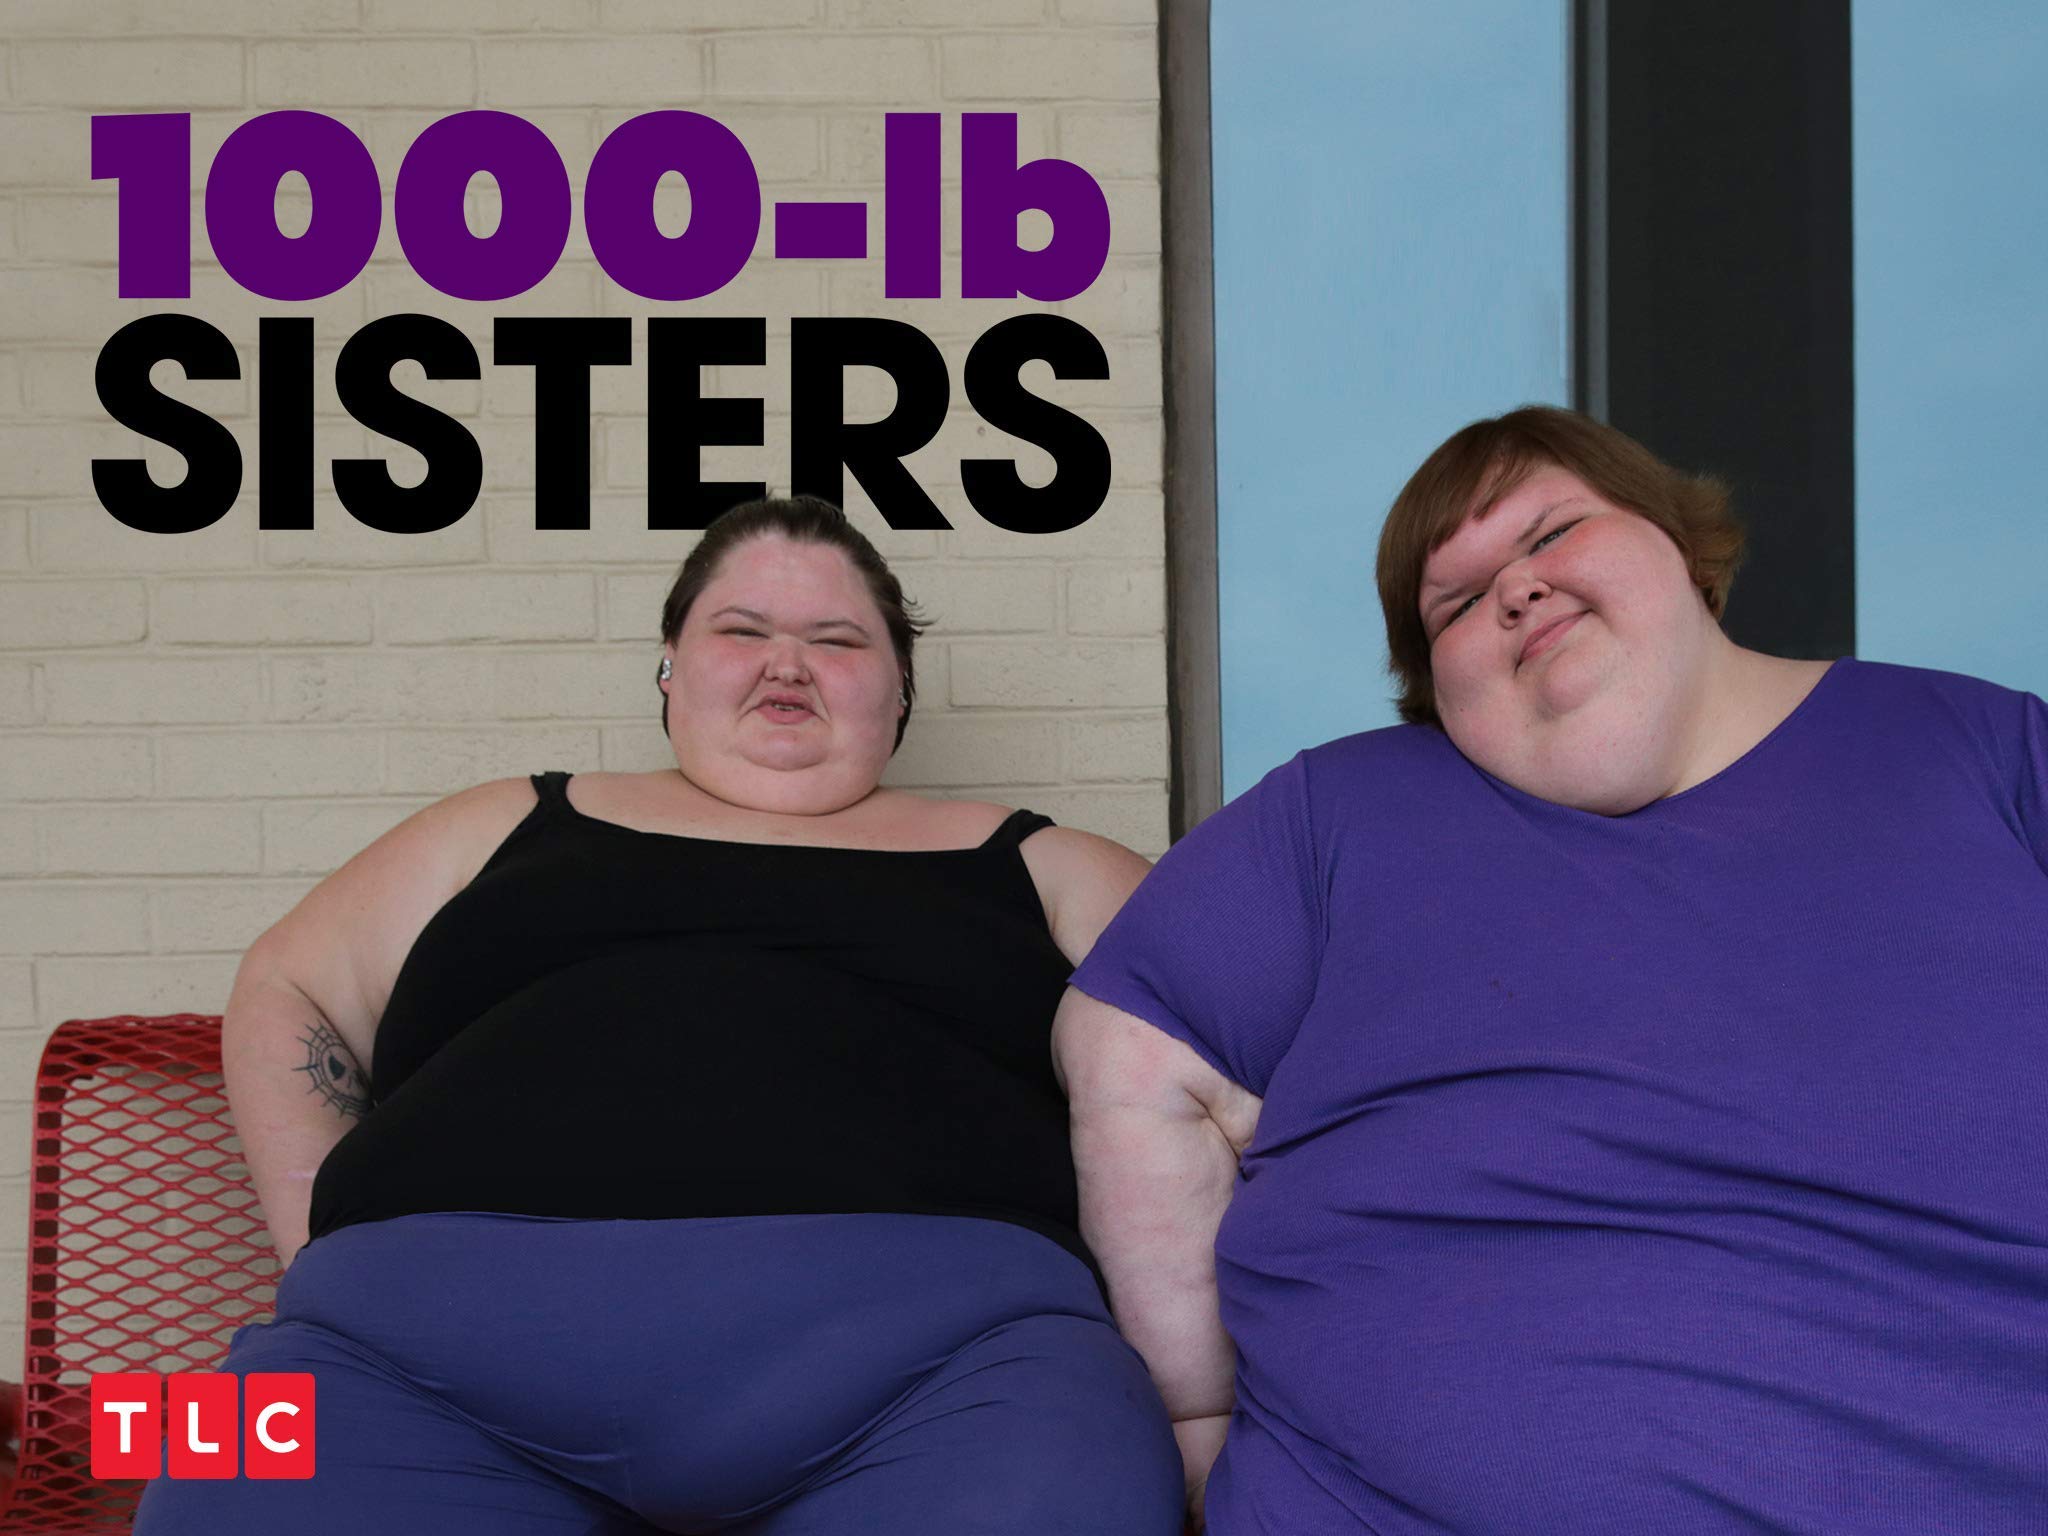 Finished binging '1000-lb Sisters'? Watch these addictive TLC shows now – Film Daily